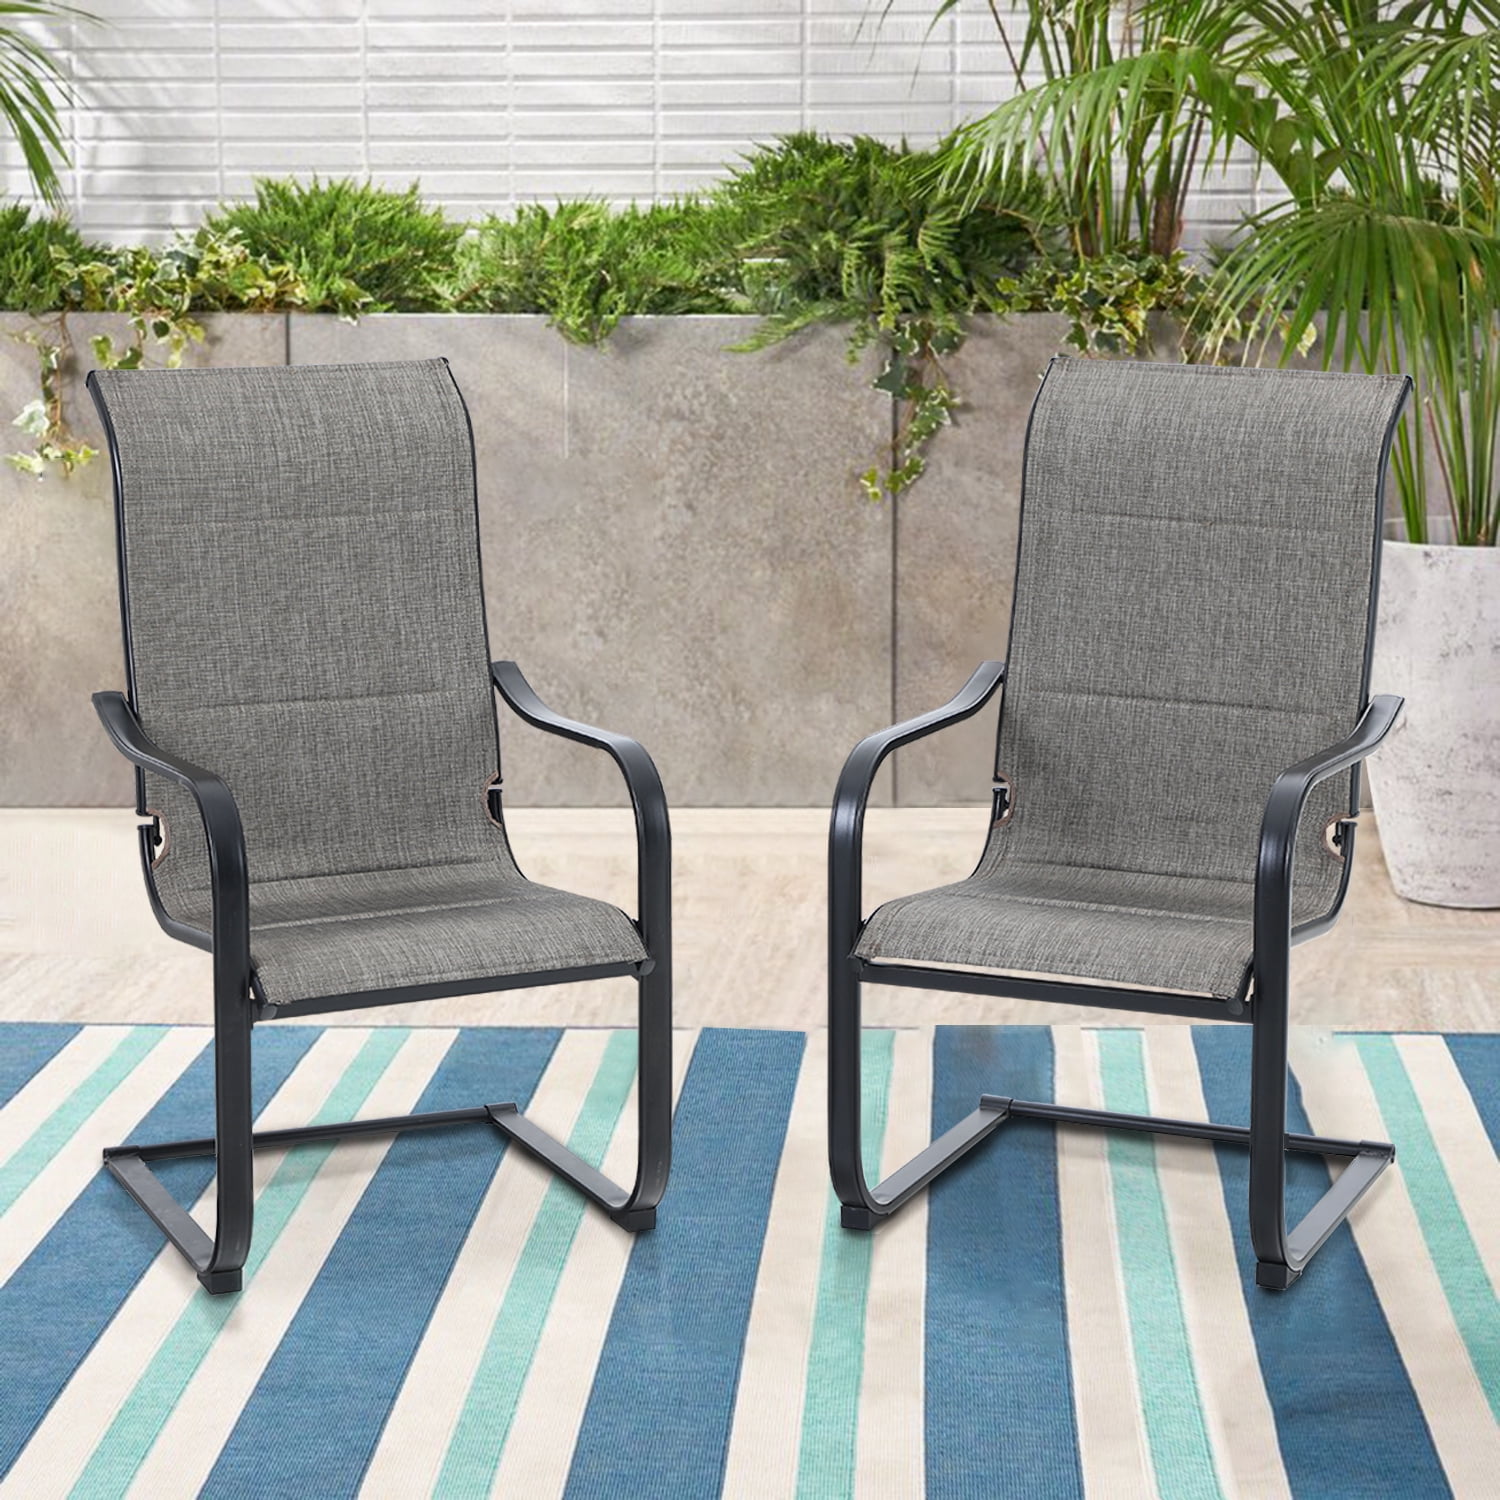 2 Pack Outdoor Swivel Patio Dining Arm Chair Padded 